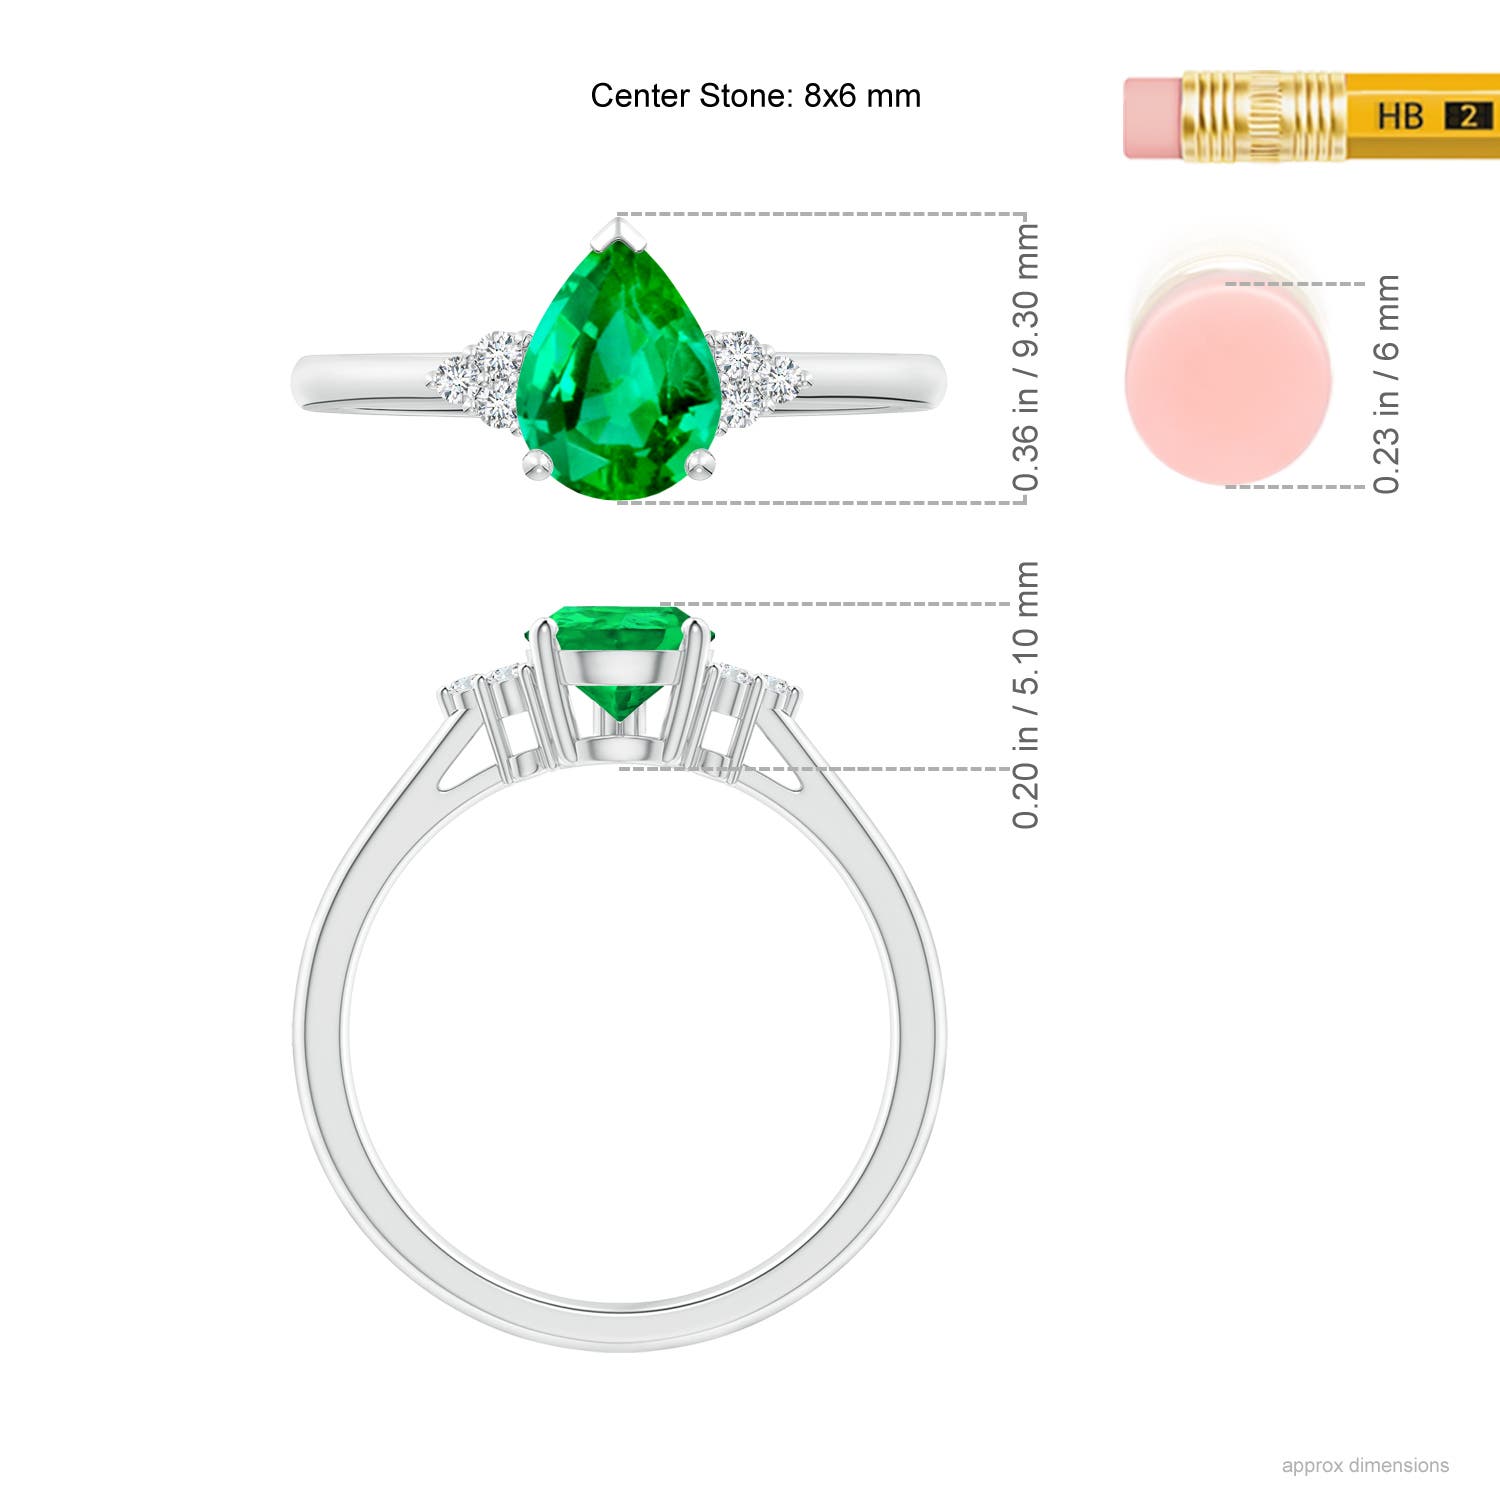 AAA - Emerald / 1.02 CT / 14 KT White Gold